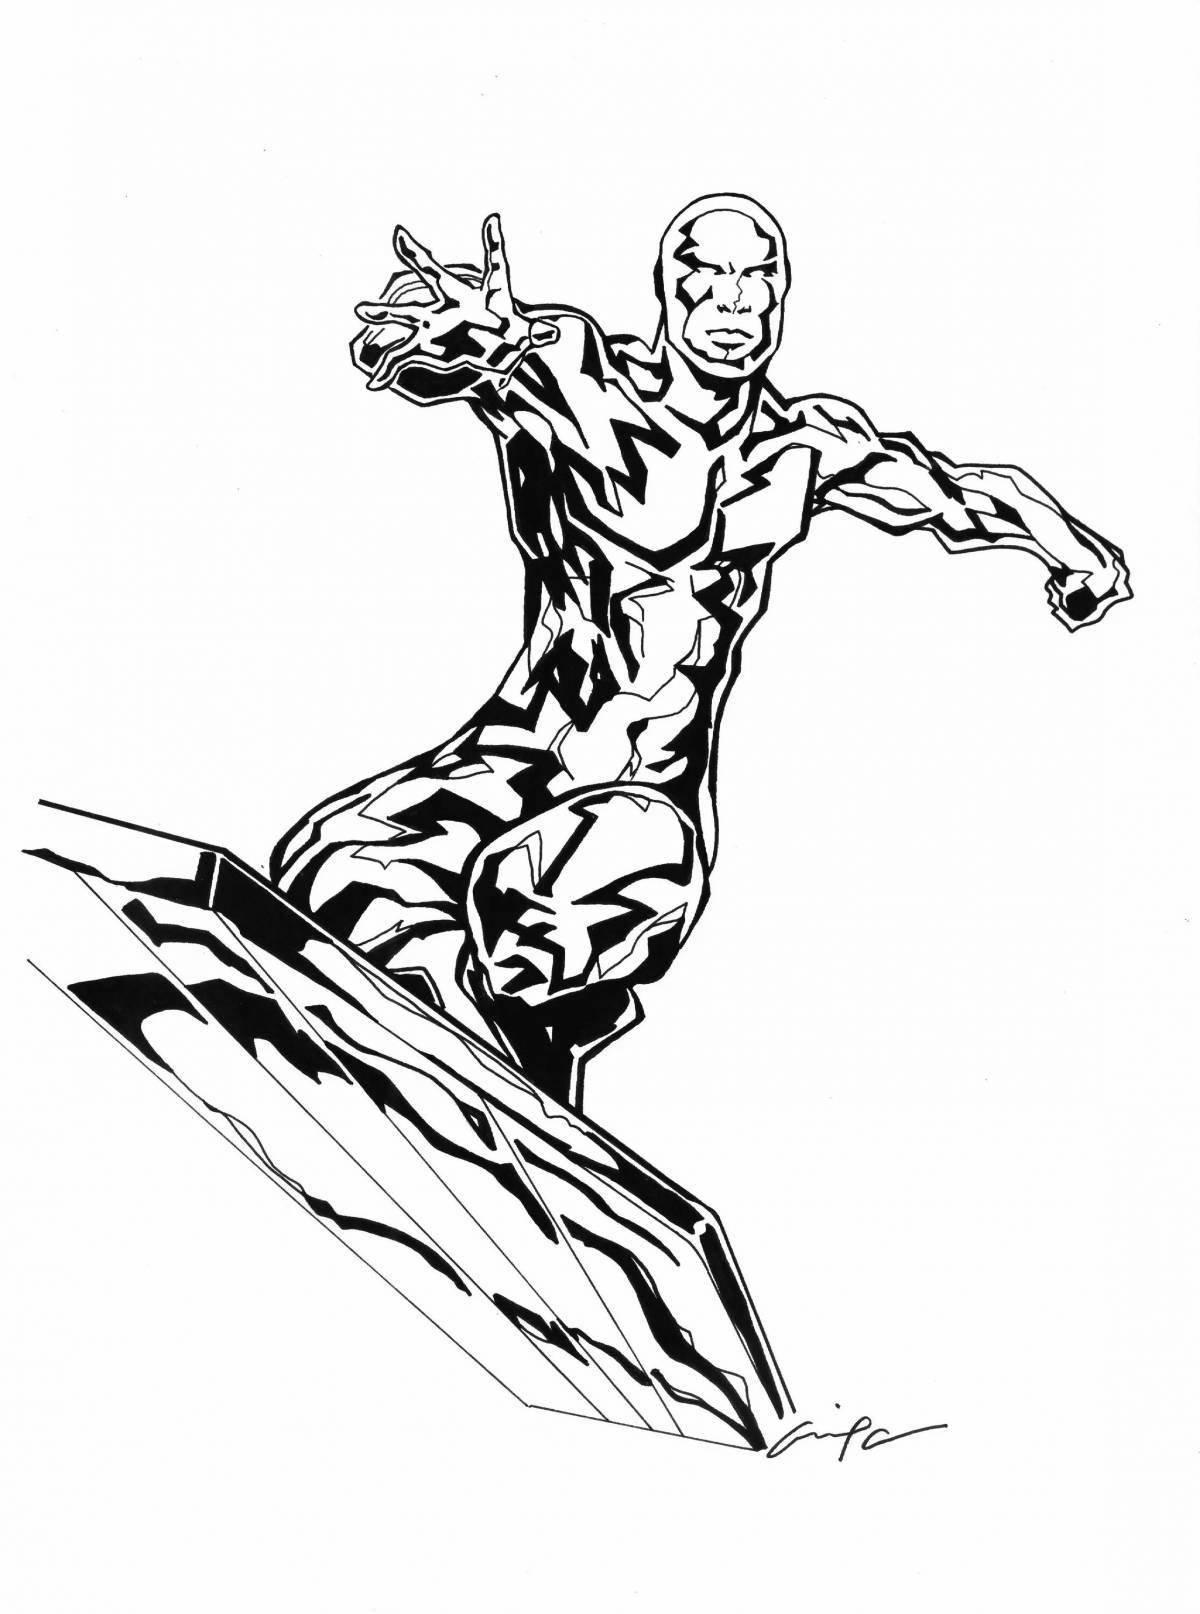 Shiny silver surfer coloring book